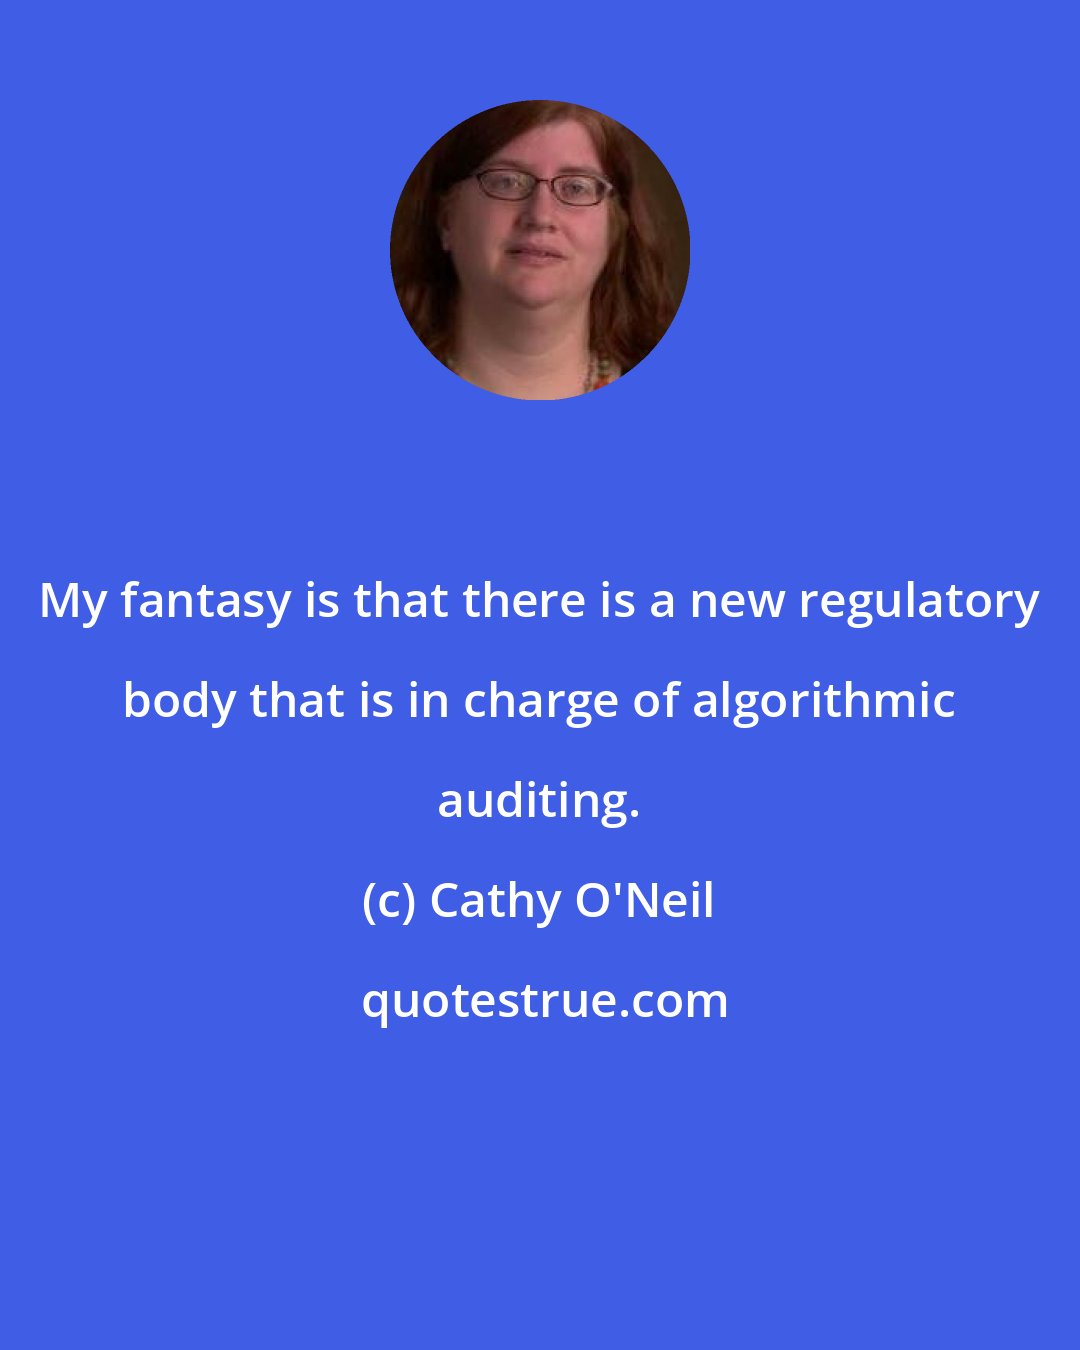 Cathy O'Neil: My fantasy is that there is a new regulatory body that is in charge of algorithmic auditing.